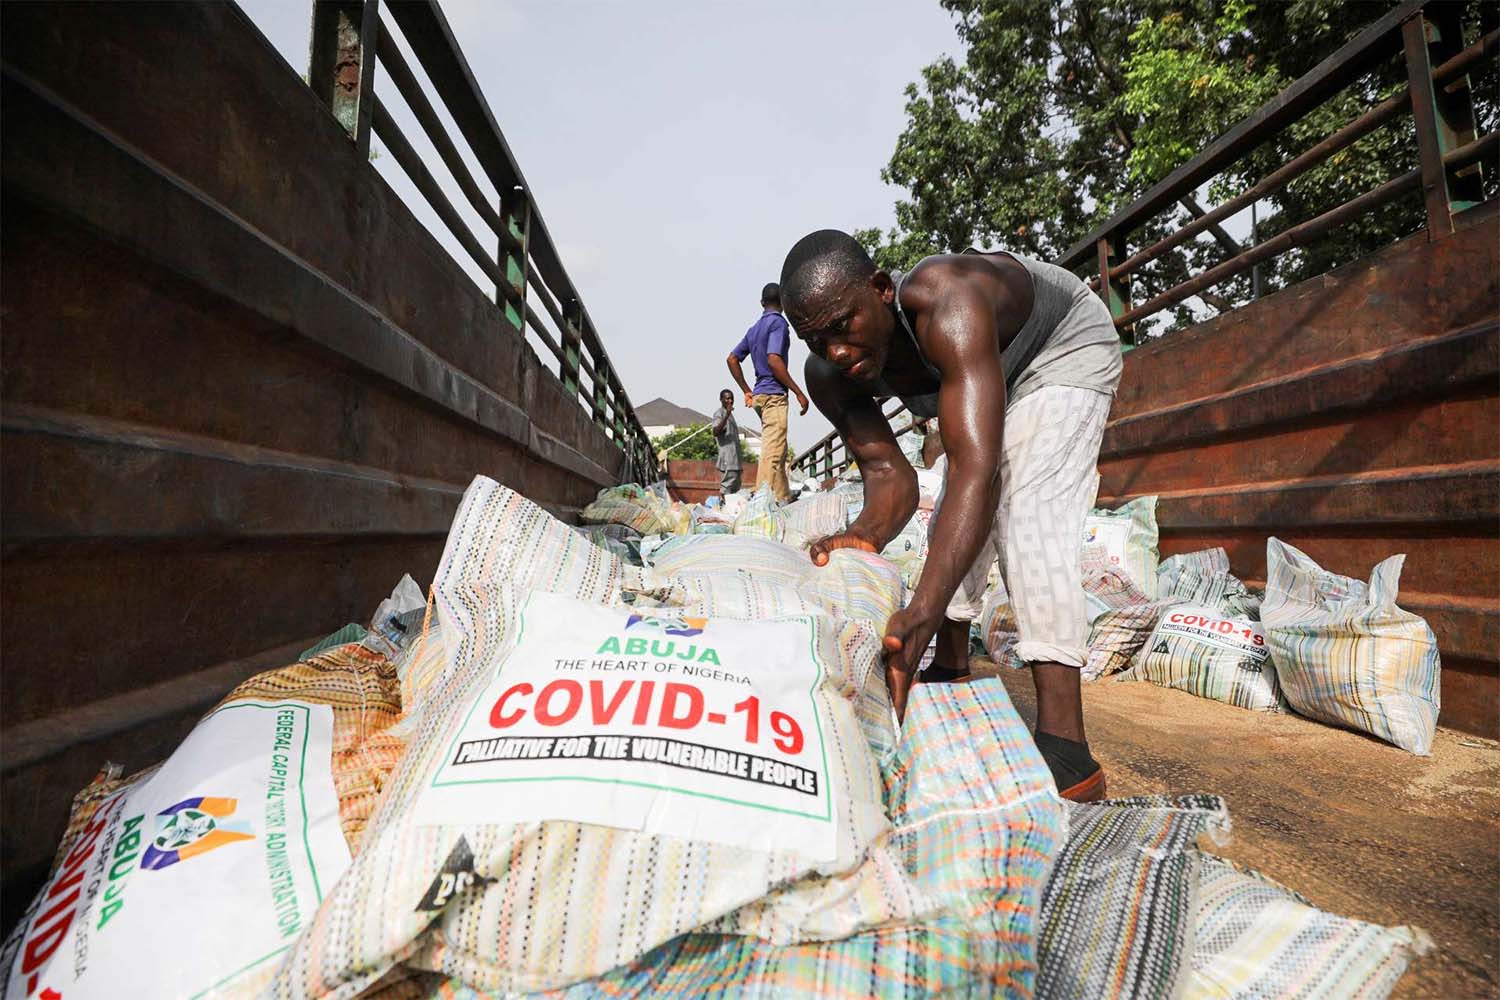 Men load sacks of rice among other food aid in a truck, to be distributed for those affected by procedures taken to curb the spread of coronavirus in Abuja